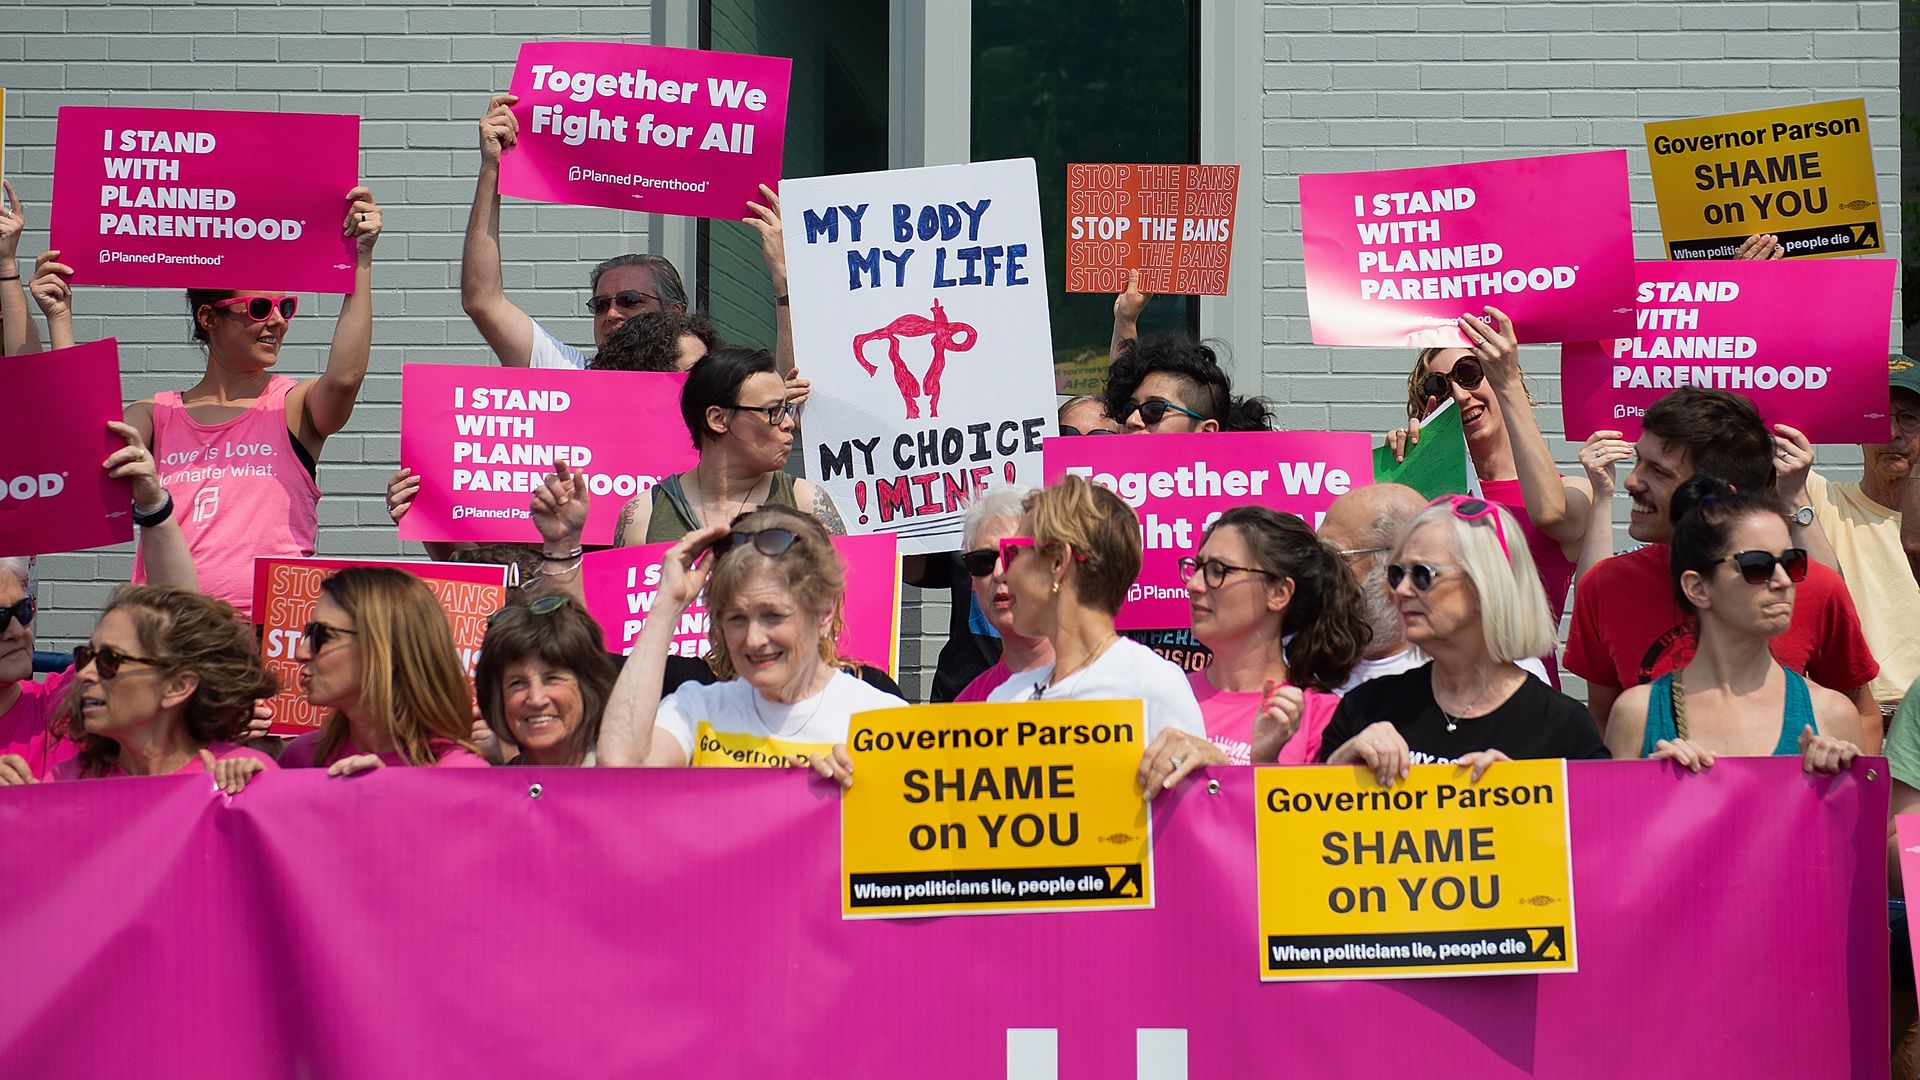 In this image, a line of mostly women protestors hold pro-abortion signs.